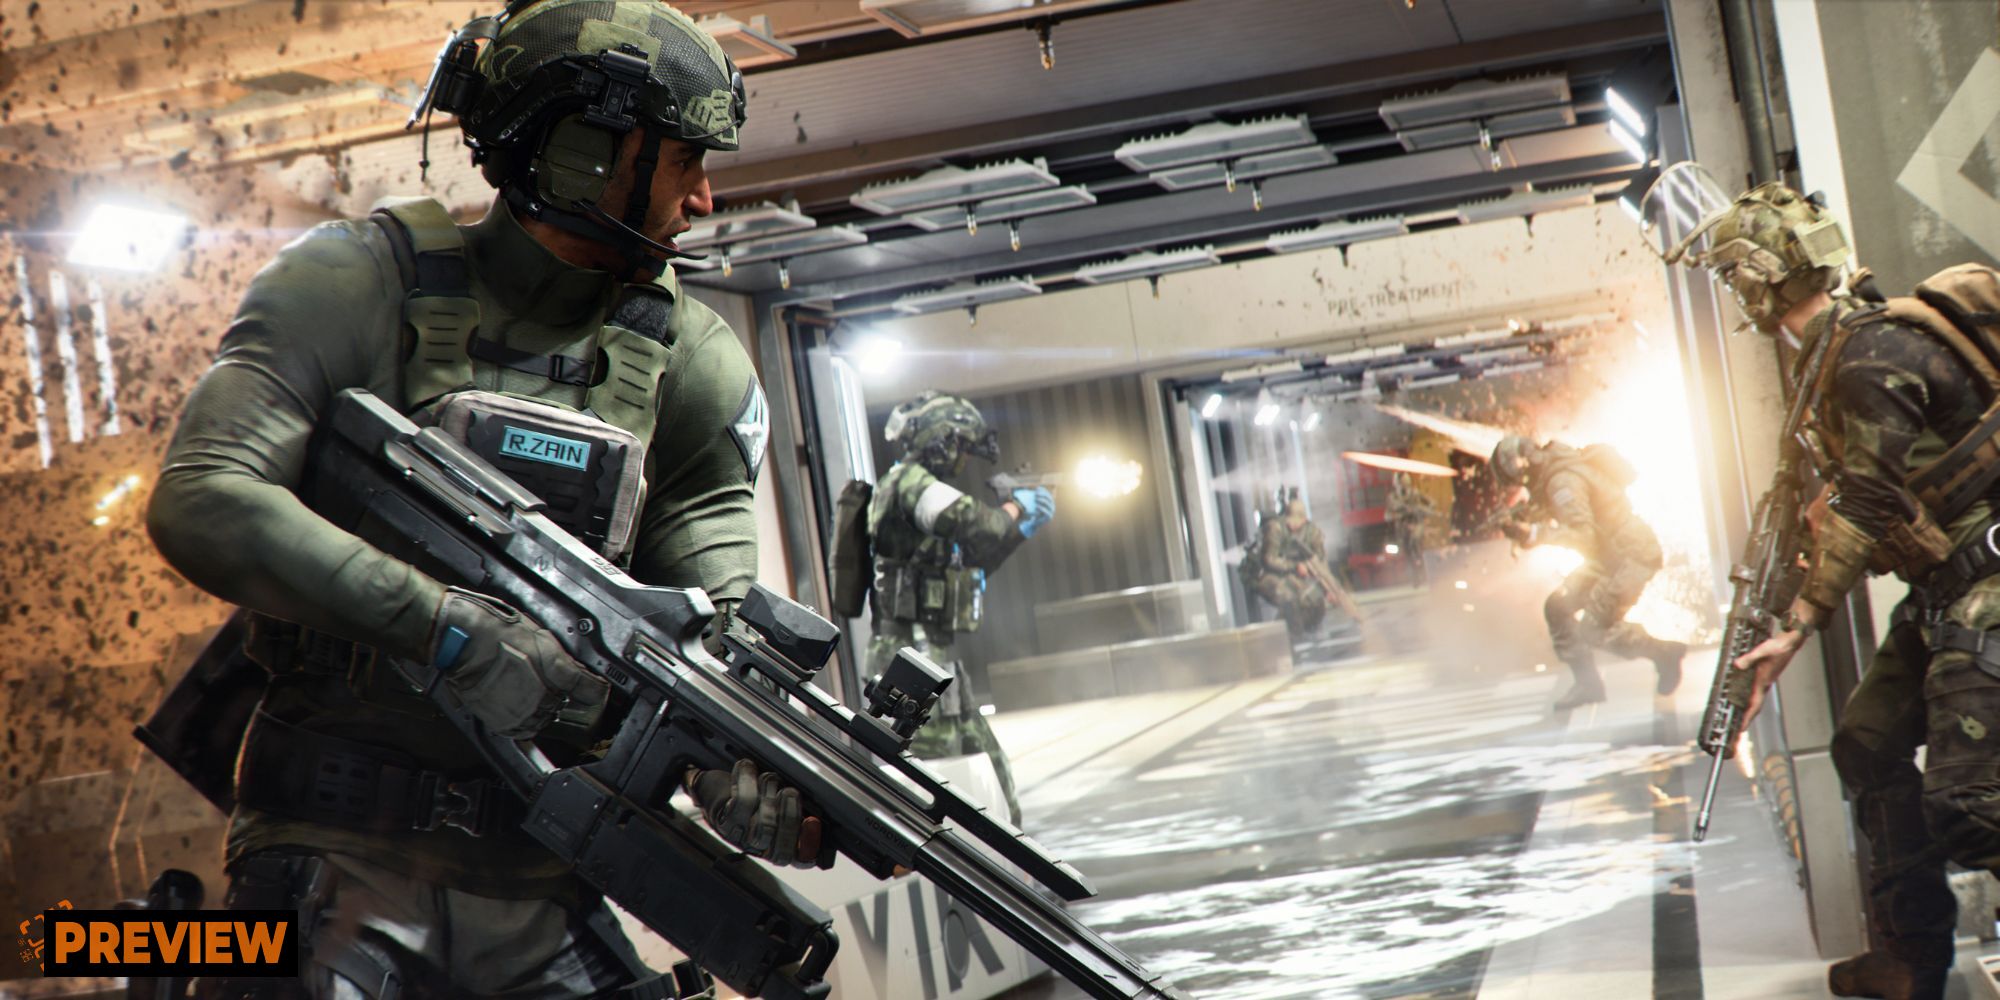 A preview for Battlefield 2042's third season, showing new Specialist Zain in a firefight.